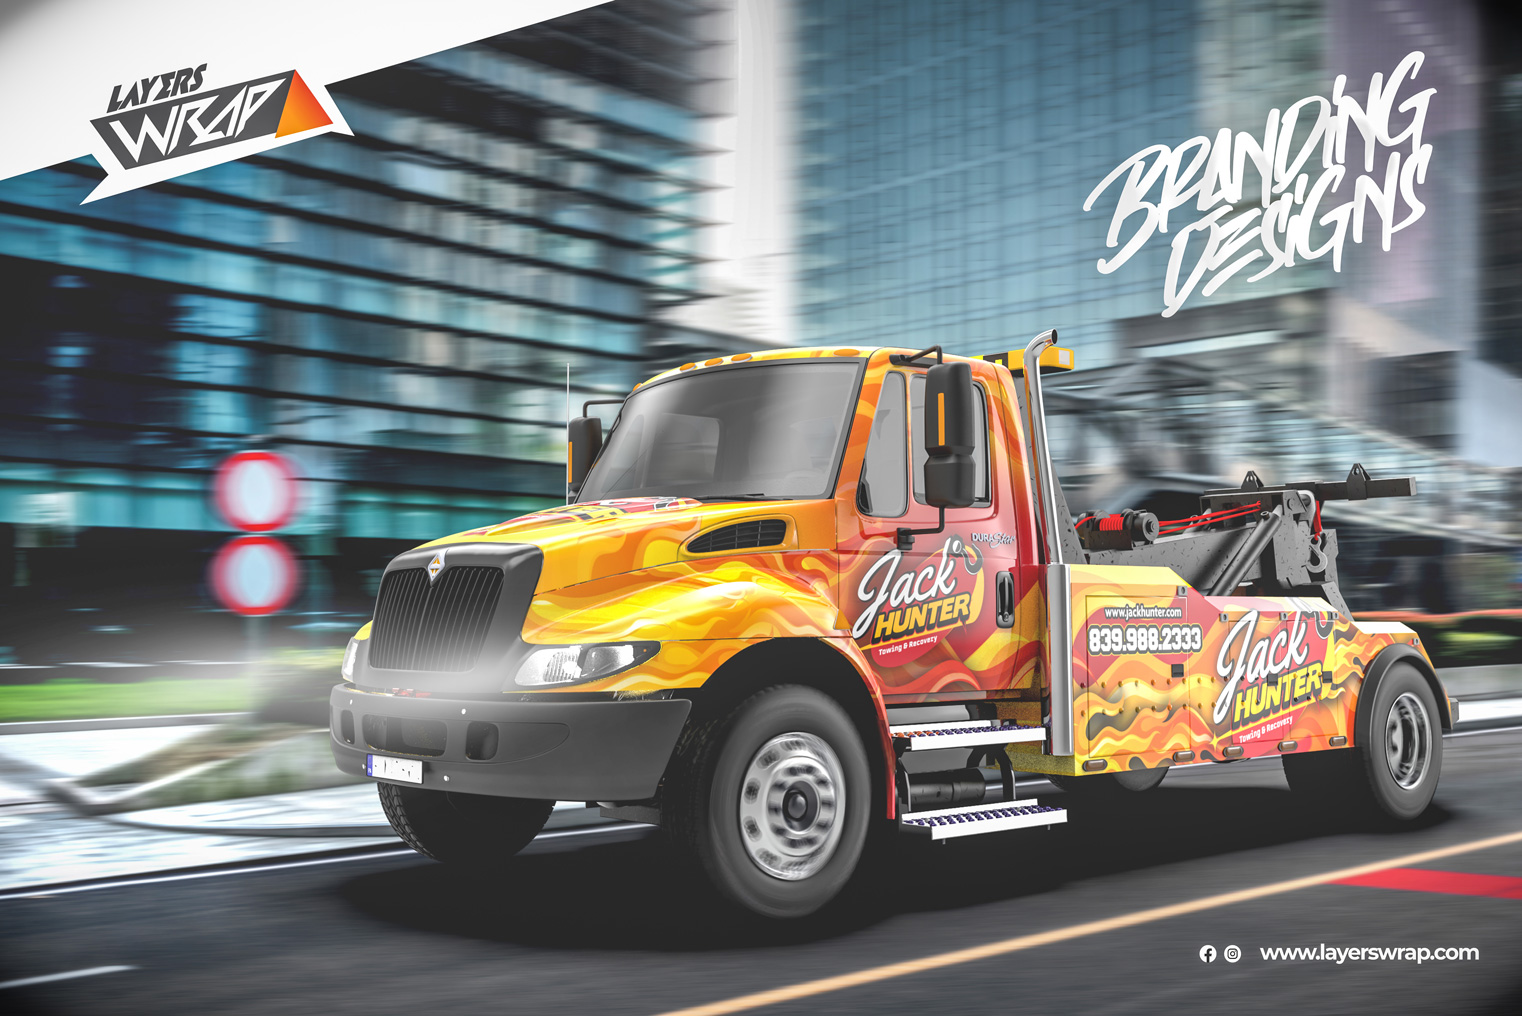 Tow Truck Wrap Design by Layers Wrap